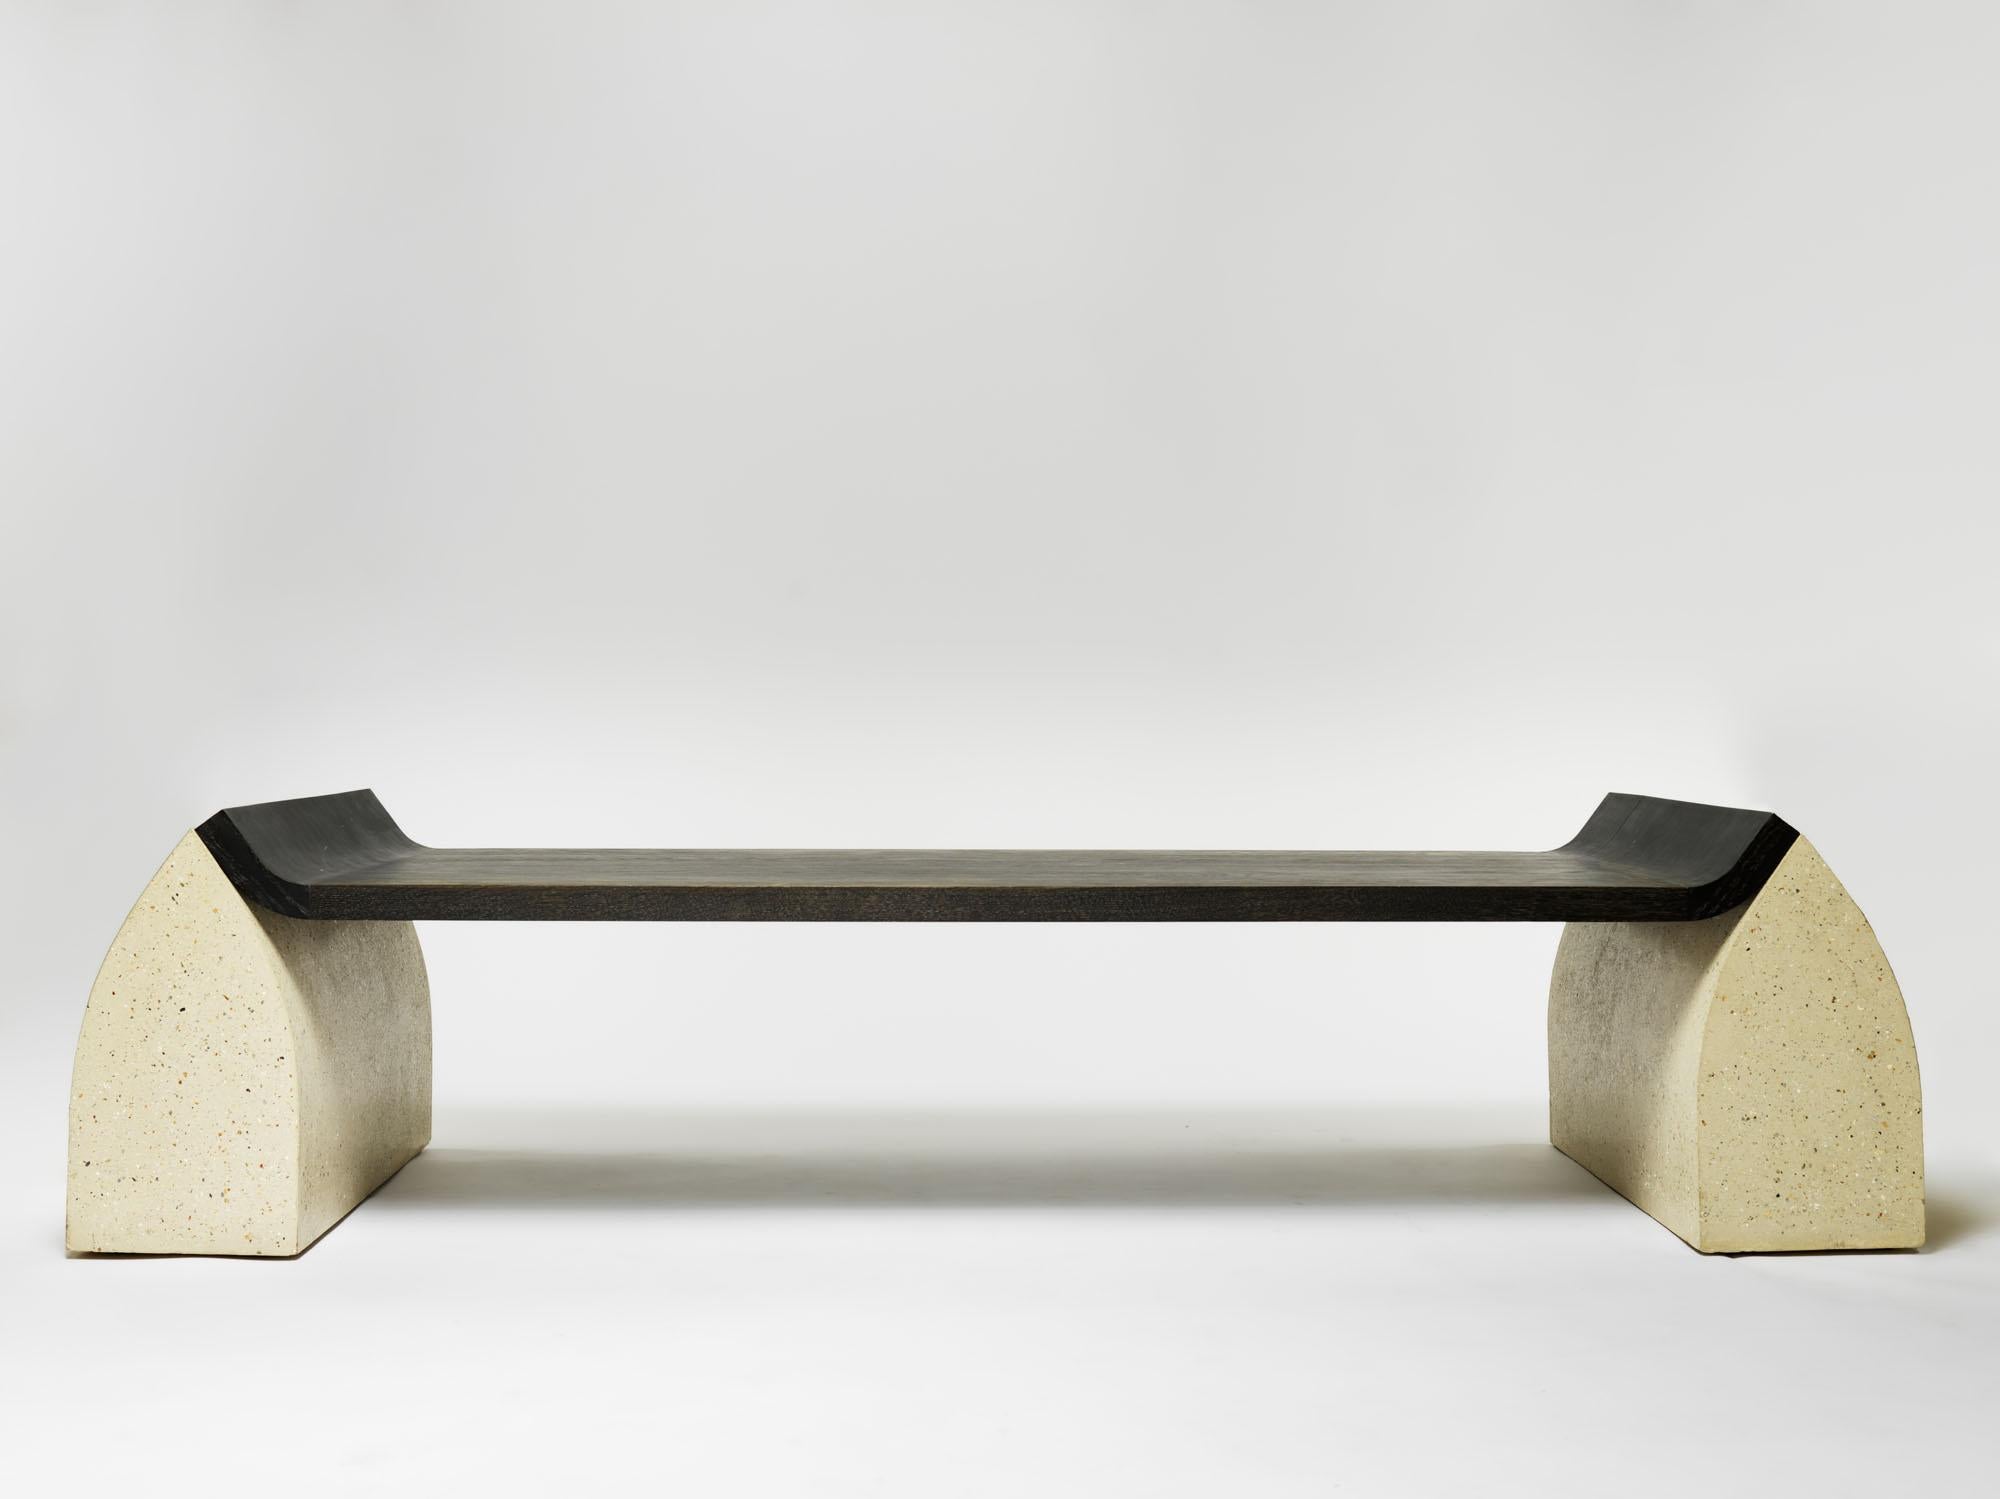 Contemporary Colored Oak 'Oiled', Granito Stone Traaf Bench Small by Tim Vranken For Sale